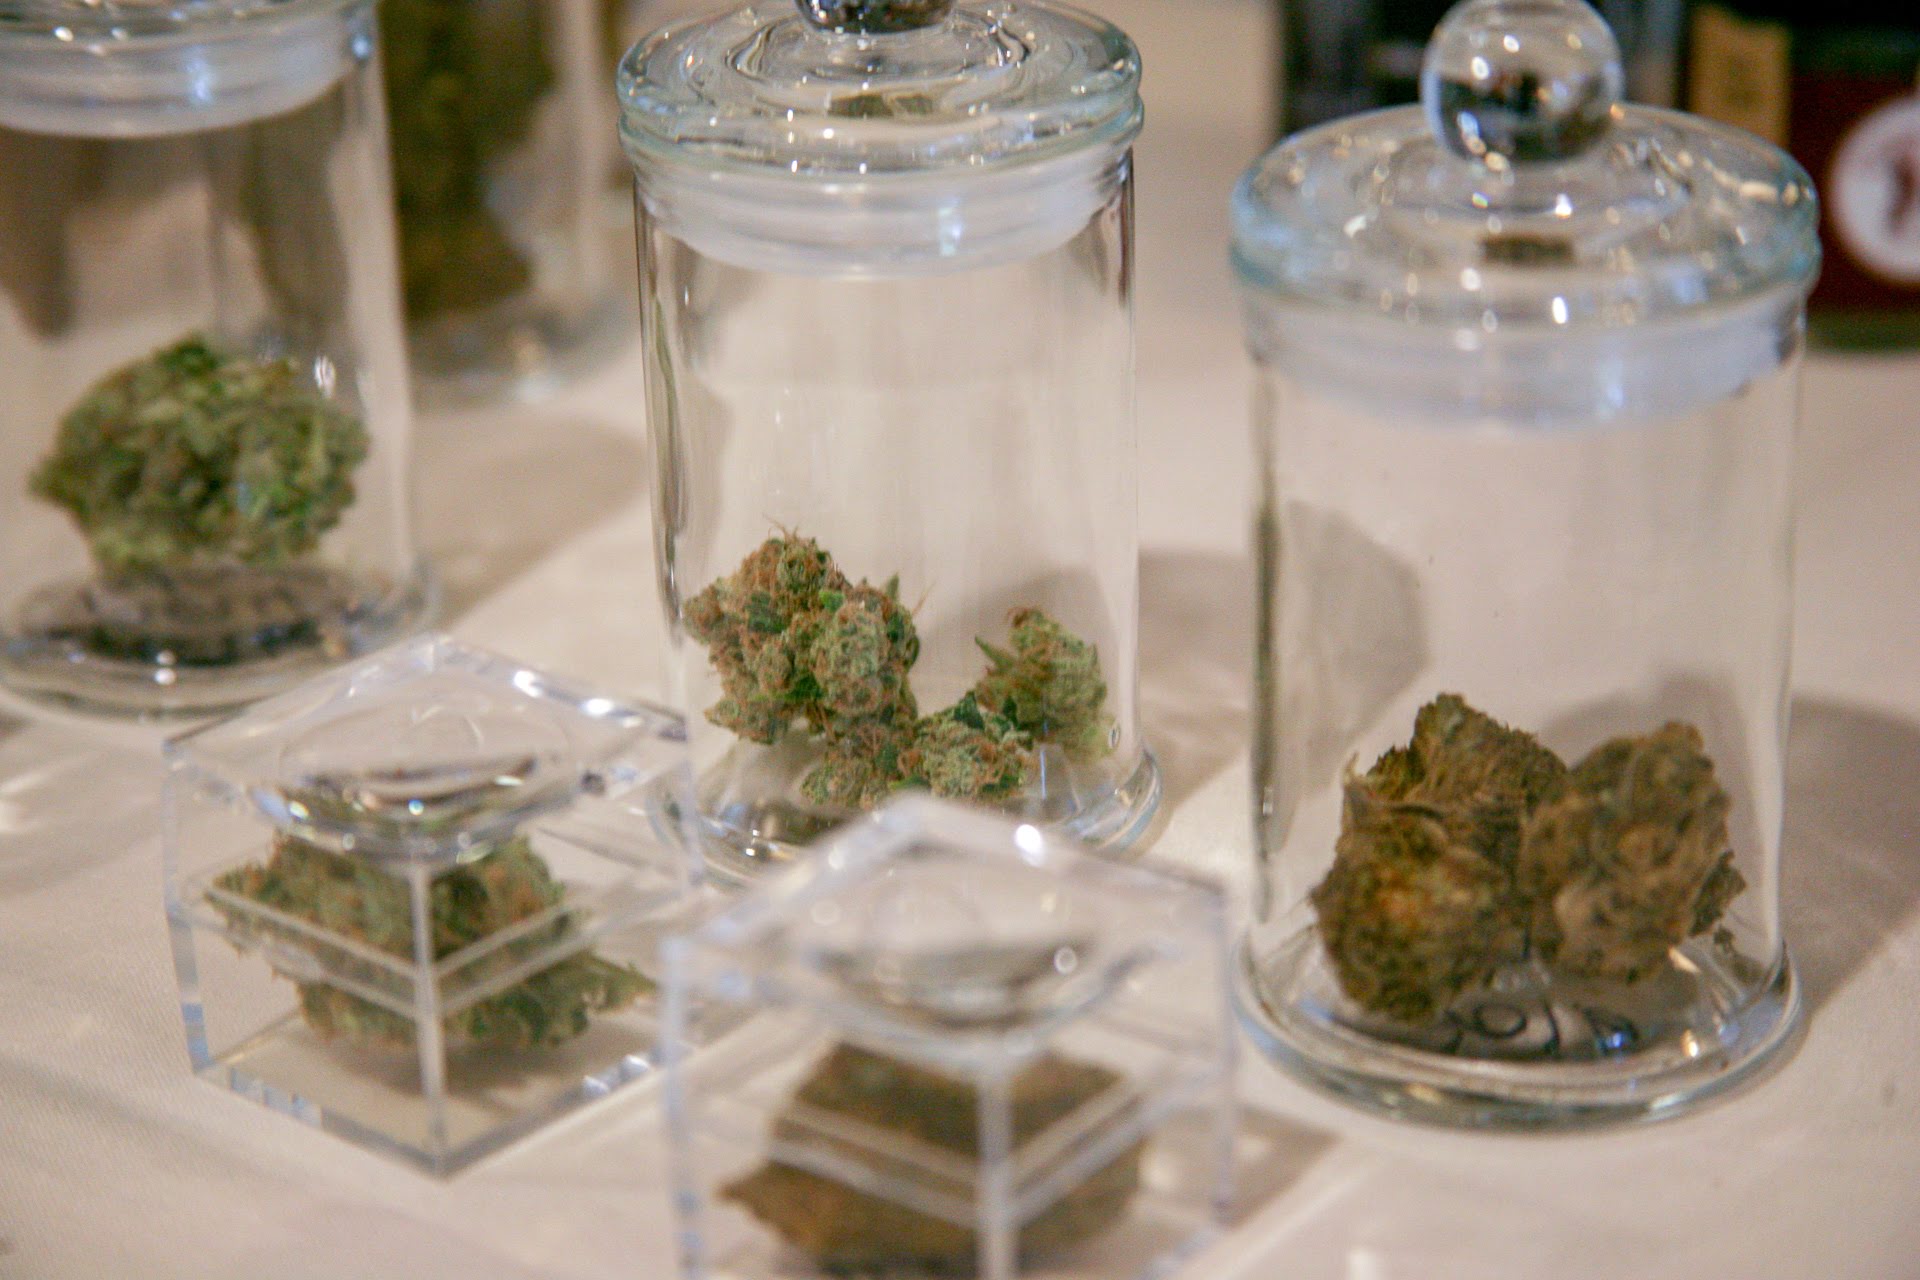 Different cannabis flowers on display during the 2019 Wine & Weed Symposium